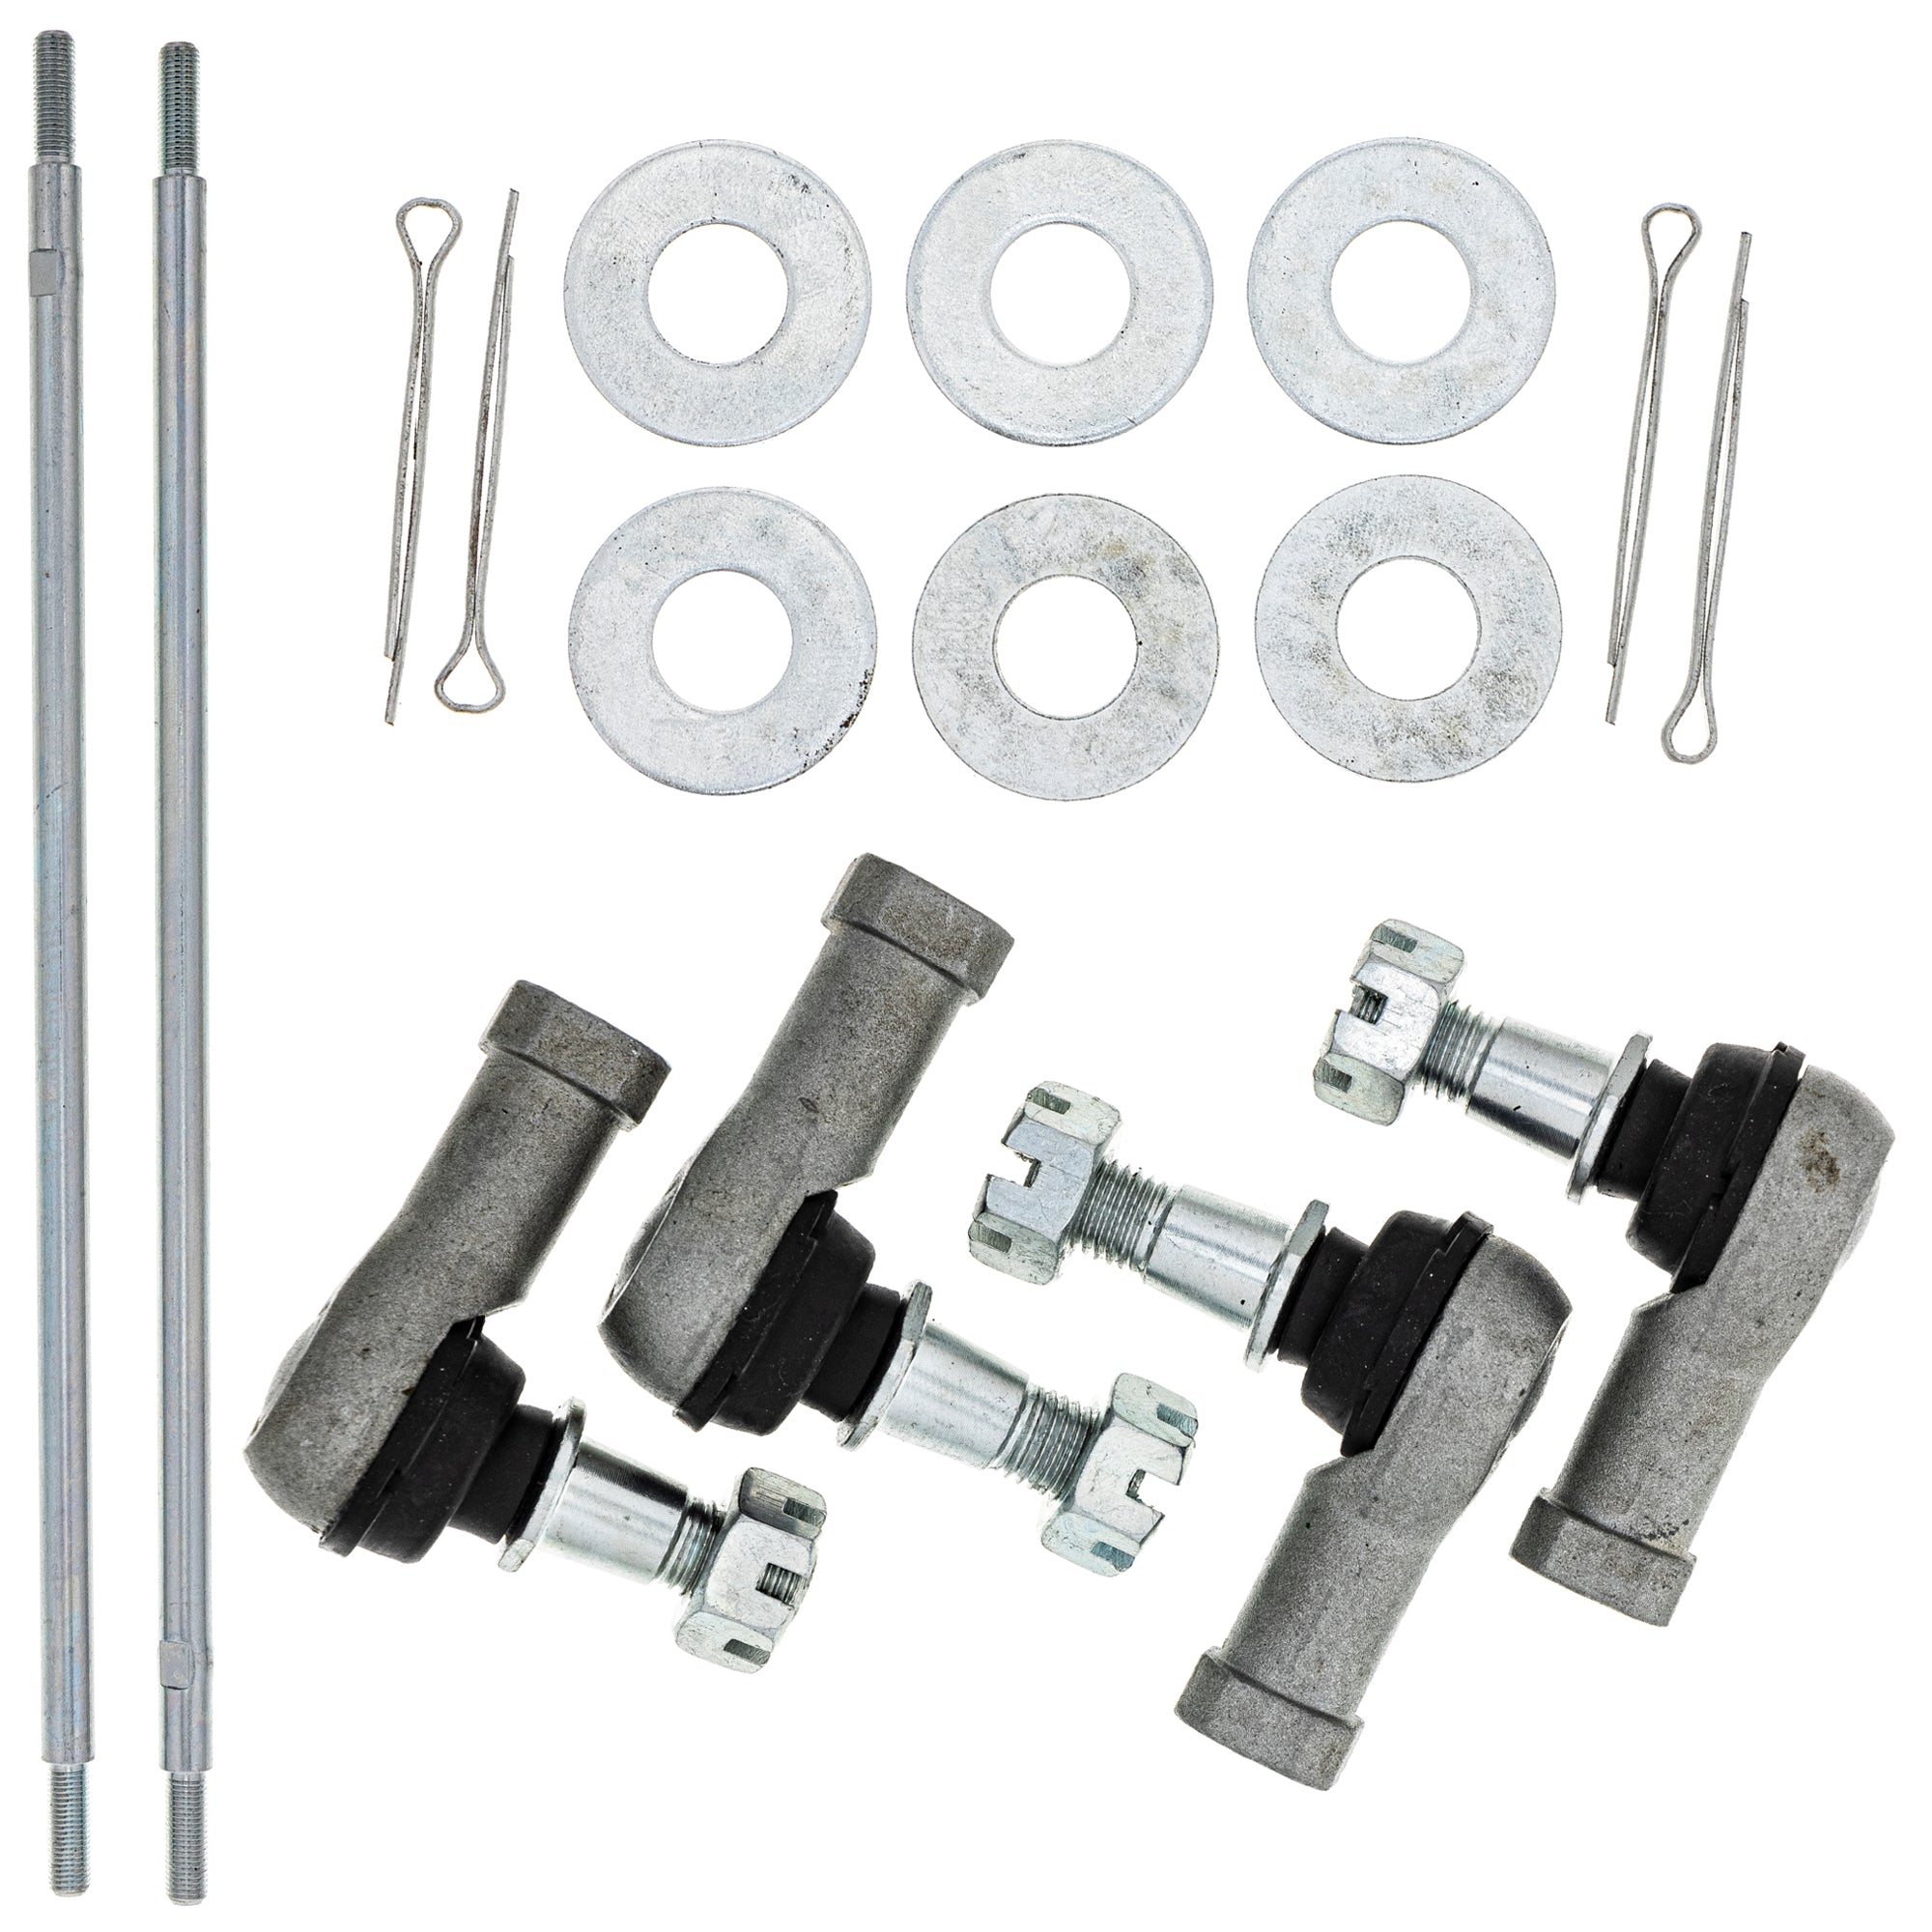 Tie Rods & Tie Rods Ends Kit for Polaris BRP Can-Am Ski-Doo Sea-Doo DS NICHE MK1006310